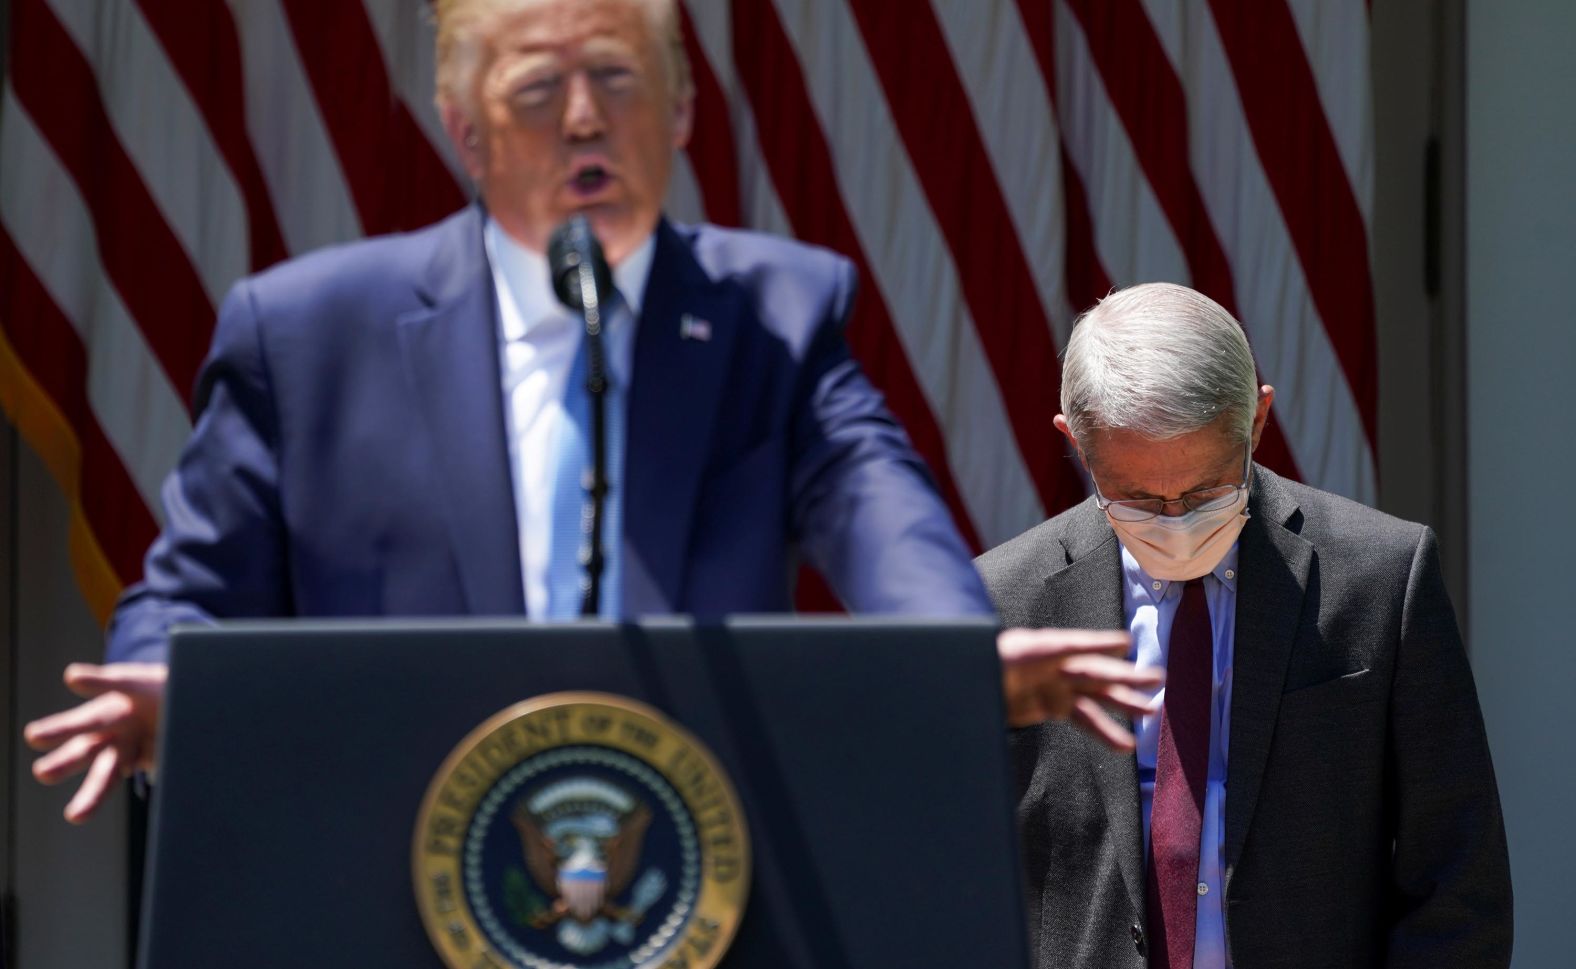 Dr. Anthony Fauci, director of the National Institute of Allergy and Infectious Diseases, looks down as Trump speaks in the White House Rose Garden in May 2020. Trump was unveiling <a href="https://www.cnn.com/2020/05/15/politics/trump-vaccine-effort-coronavirus/index.html" target="_blank">Operation Warp Speed,</a> a program aimed at developing a coronavirus vaccine by the end of the year.